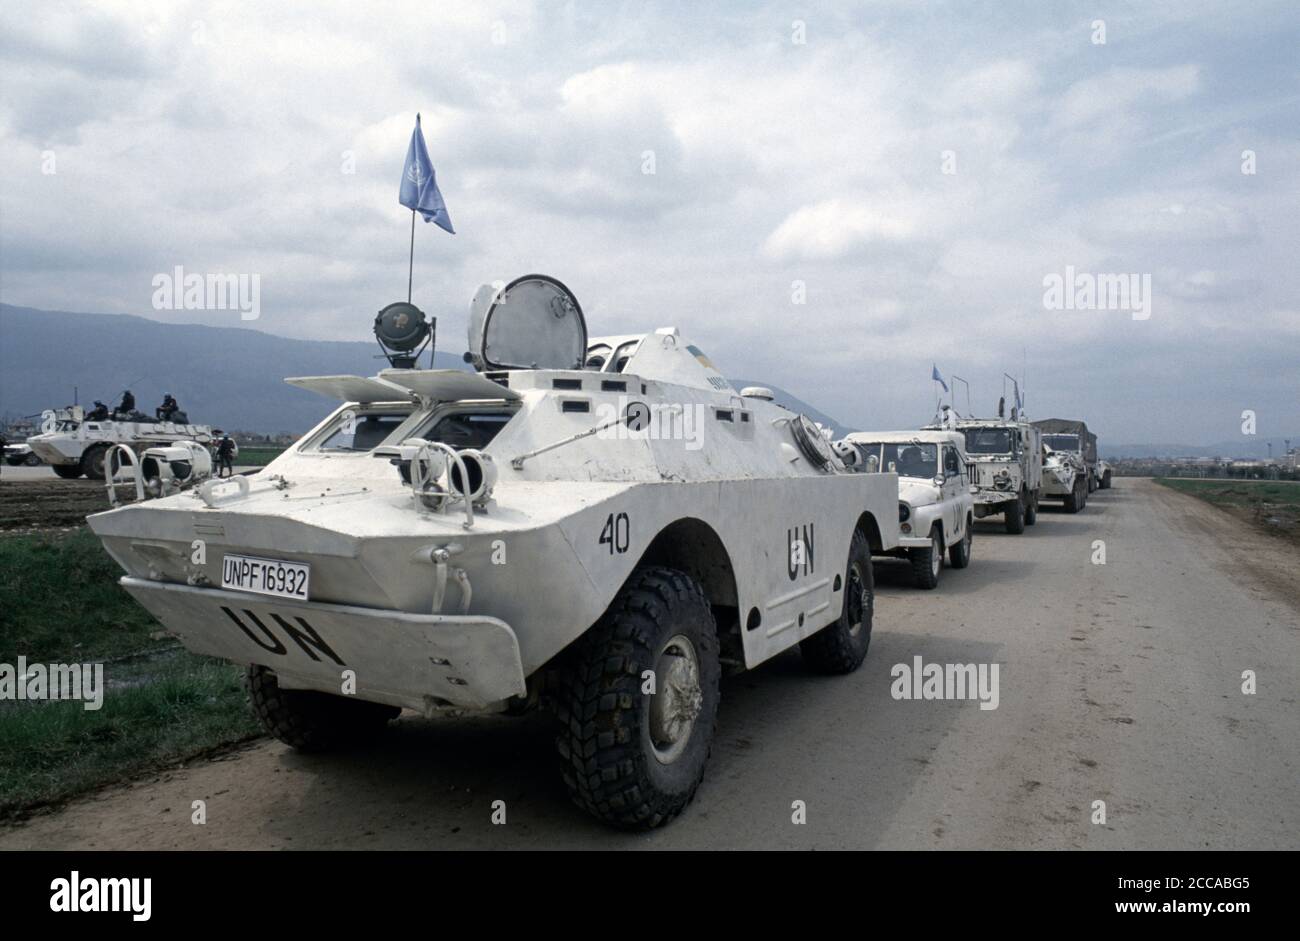 20th April 1994 During the Siege of Sarajevo: on a taxiway at the airport, a Ukrainian column is part of a United Nations convoy, on standby to travel to Goražde, 55 miles (90Km) south-east of Sarajevo. Stock Photo